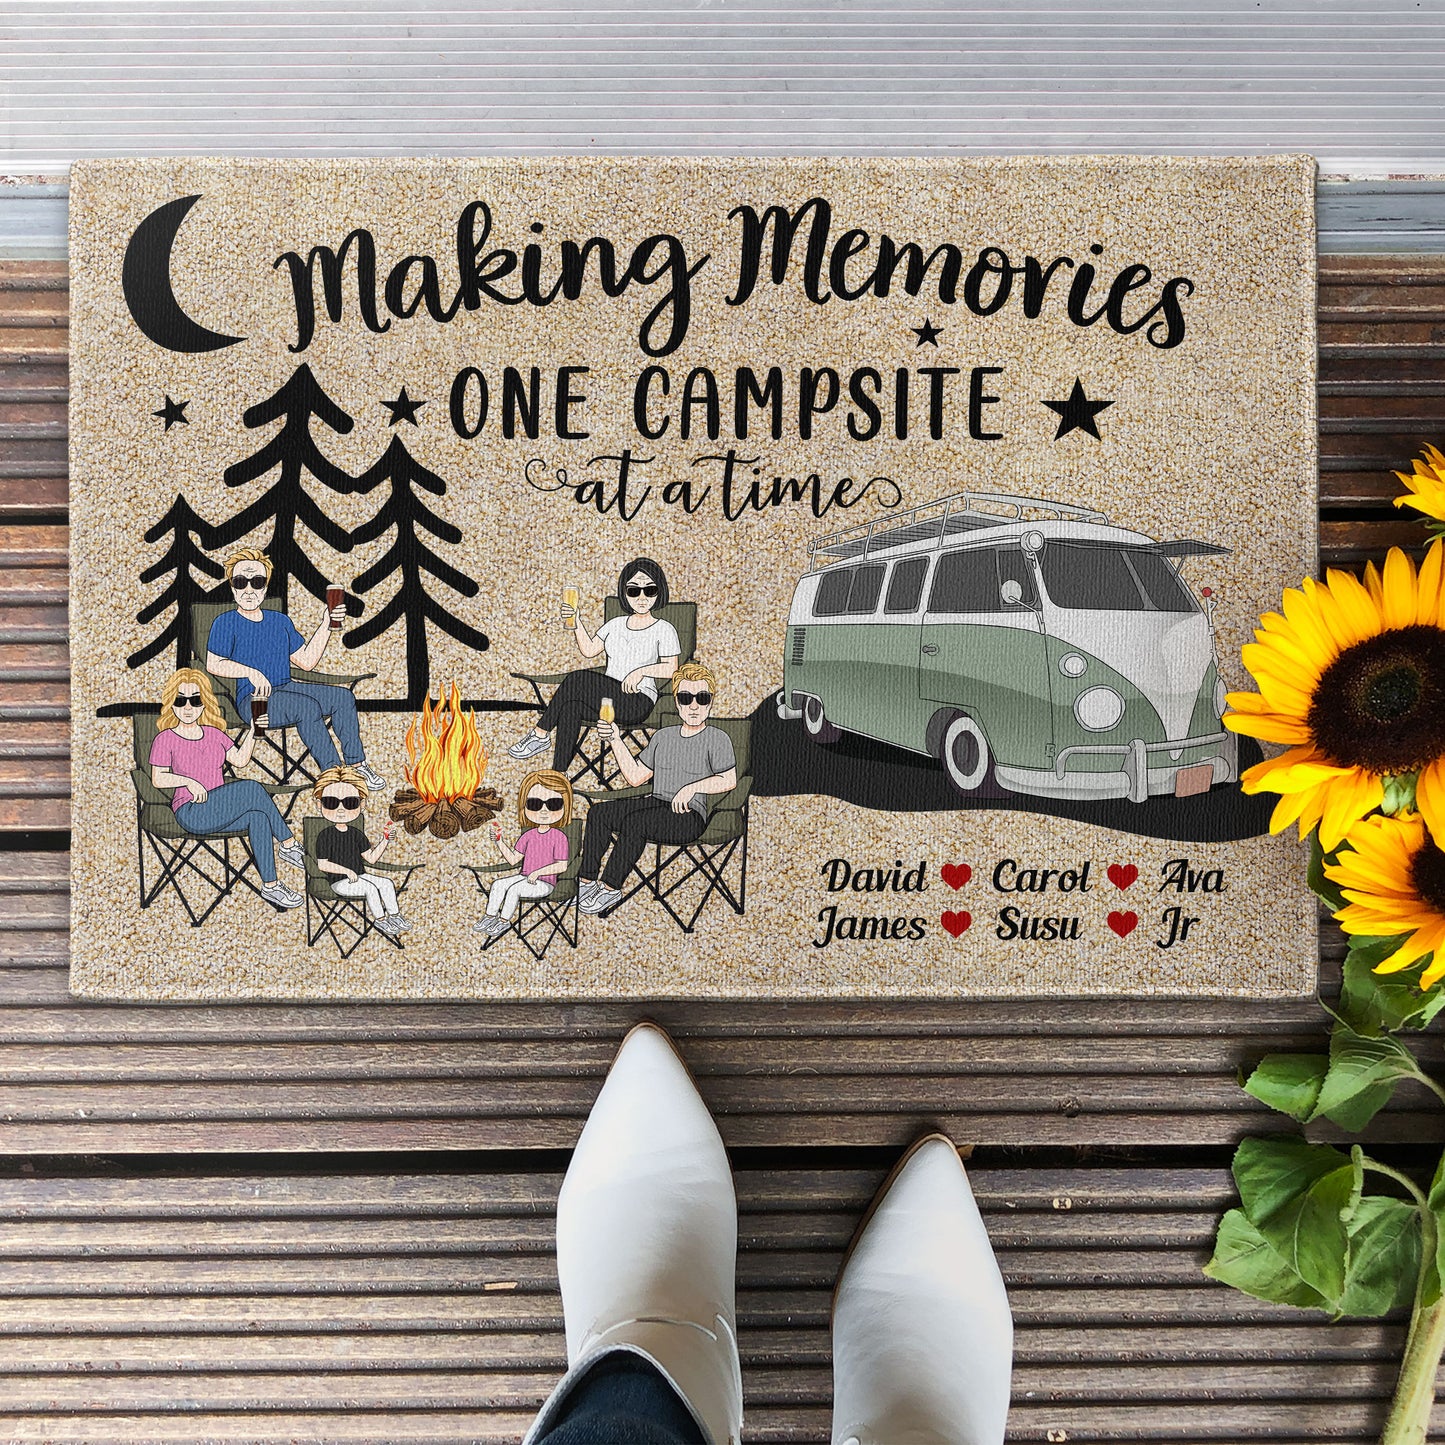 Making Memories One Campsite At A Time Sketch Version - Personalized Doormat - Camping Family